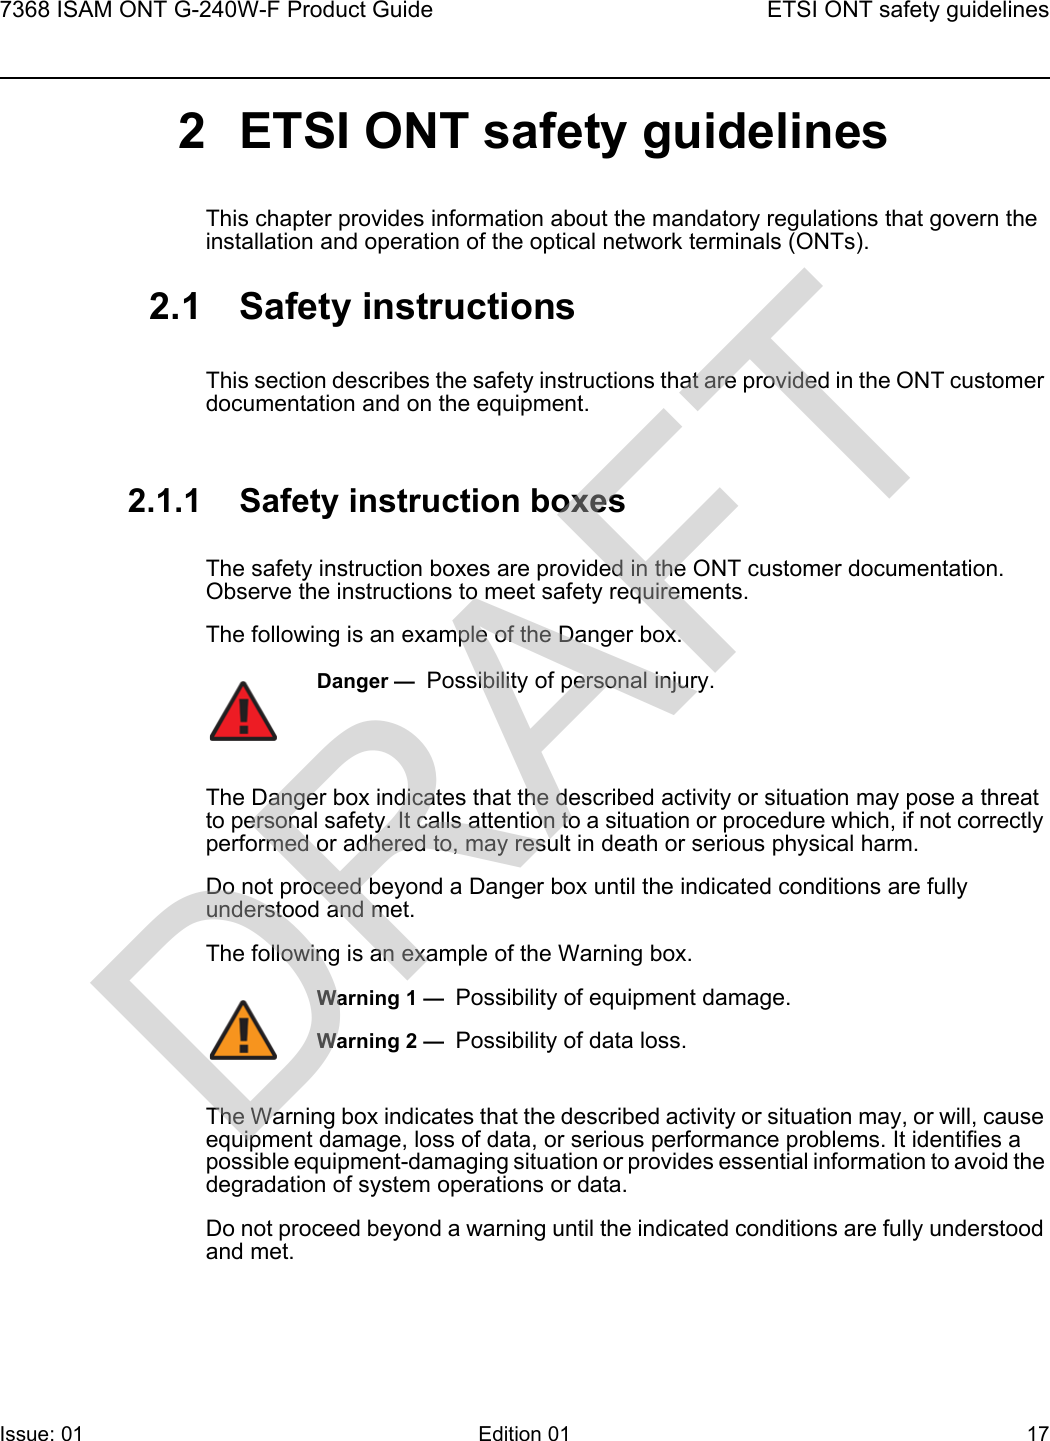 7368 ISAM ONT G-240W-F Product Guide ETSI ONT safety guidelinesIssue: 01 Edition 01 17 2 ETSI ONT safety guidelinesThis chapter provides information about the mandatory regulations that govern the installation and operation of the optical network terminals (ONTs).2.1 Safety instructionsThis section describes the safety instructions that are provided in the ONT customer documentation and on the equipment.2.1.1 Safety instruction boxesThe safety instruction boxes are provided in the ONT customer documentation. Observe the instructions to meet safety requirements.The following is an example of the Danger box.The Danger box indicates that the described activity or situation may pose a threat to personal safety. It calls attention to a situation or procedure which, if not correctly performed or adhered to, may result in death or serious physical harm. Do not proceed beyond a Danger box until the indicated conditions are fully understood and met.The following is an example of the Warning box.The Warning box indicates that the described activity or situation may, or will, cause equipment damage, loss of data, or serious performance problems. It identifies a possible equipment-damaging situation or provides essential information to avoid the degradation of system operations or data.Do not proceed beyond a warning until the indicated conditions are fully understood and met.Danger —  Possibility of personal injury. Warning 1 —  Possibility of equipment damage.Warning 2 —  Possibility of data loss.DRAFT